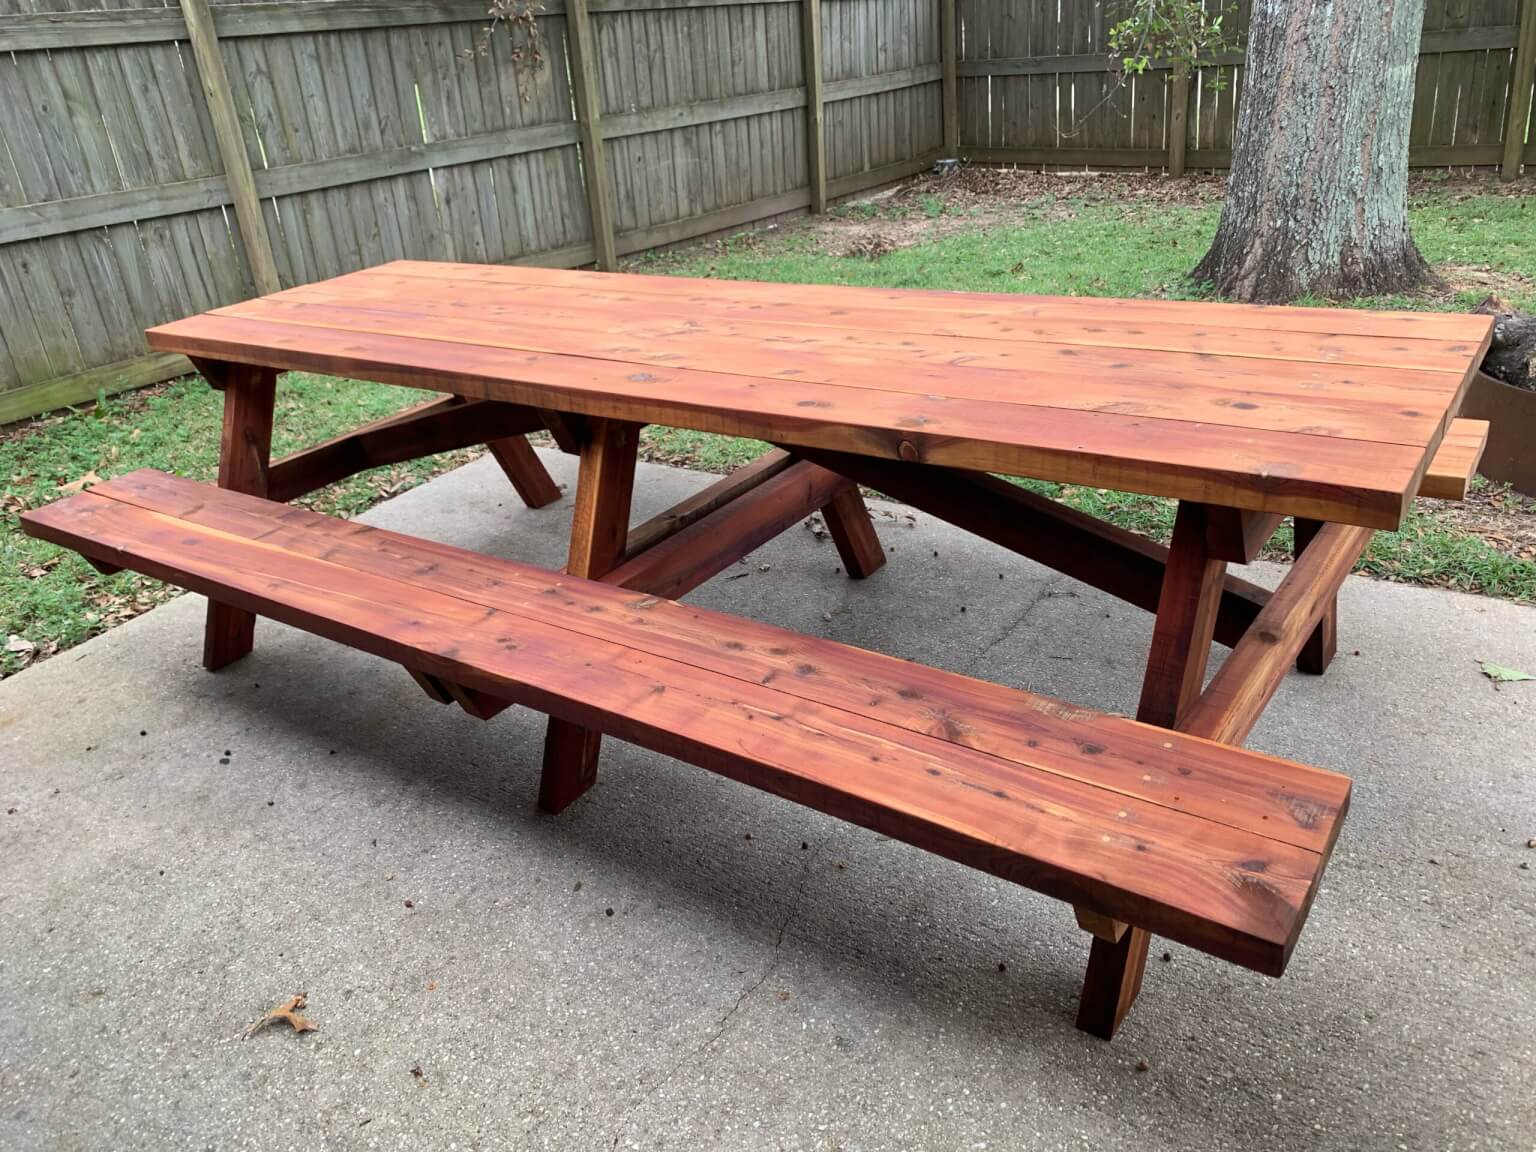 Eastern Red Cedar | Specialty Wood Products